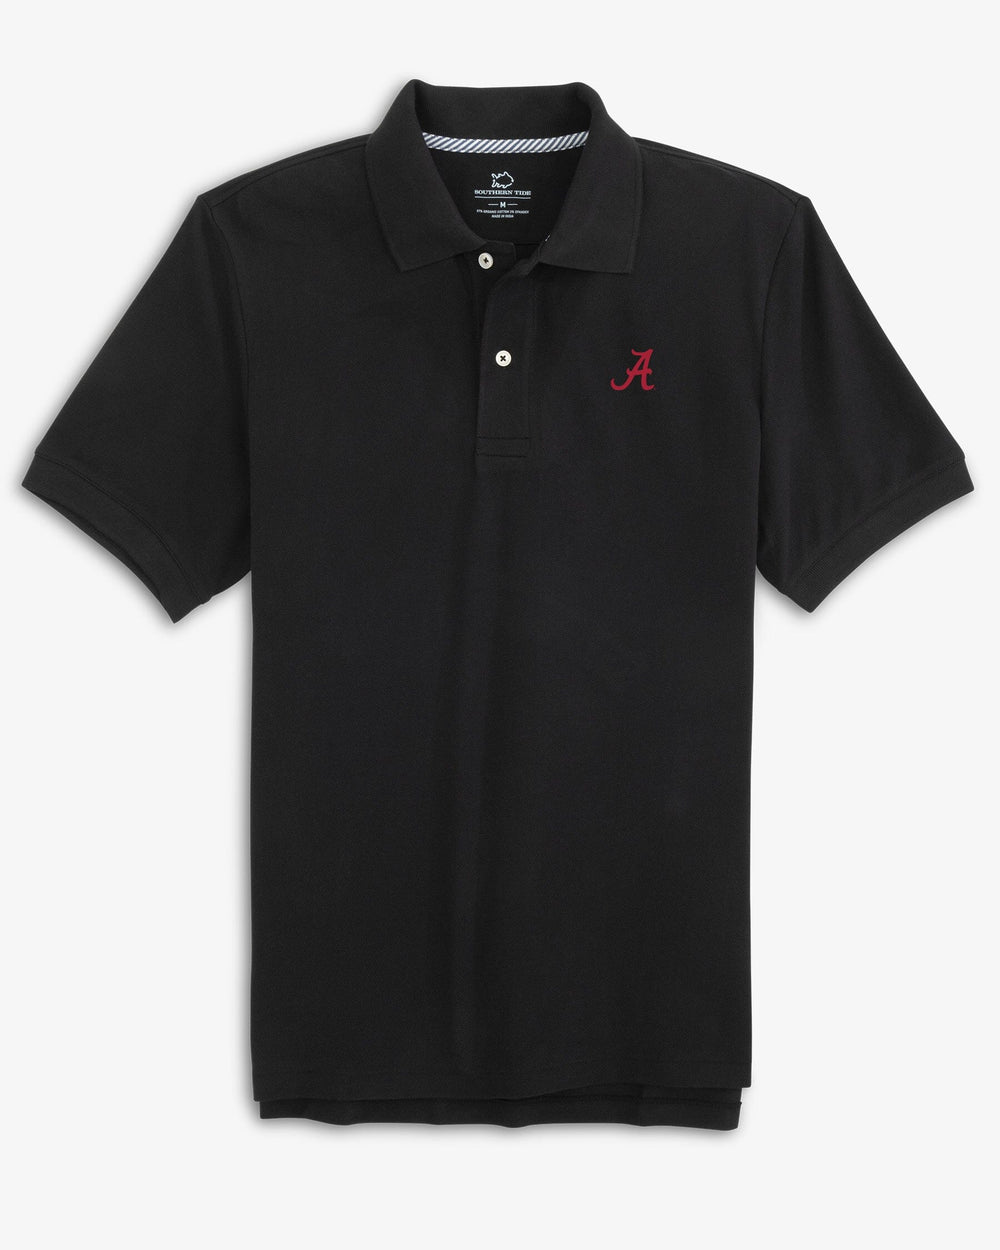 The front of the Alabama Crimson Tide Skipjack Polo Shirt by Southern Tide - Black